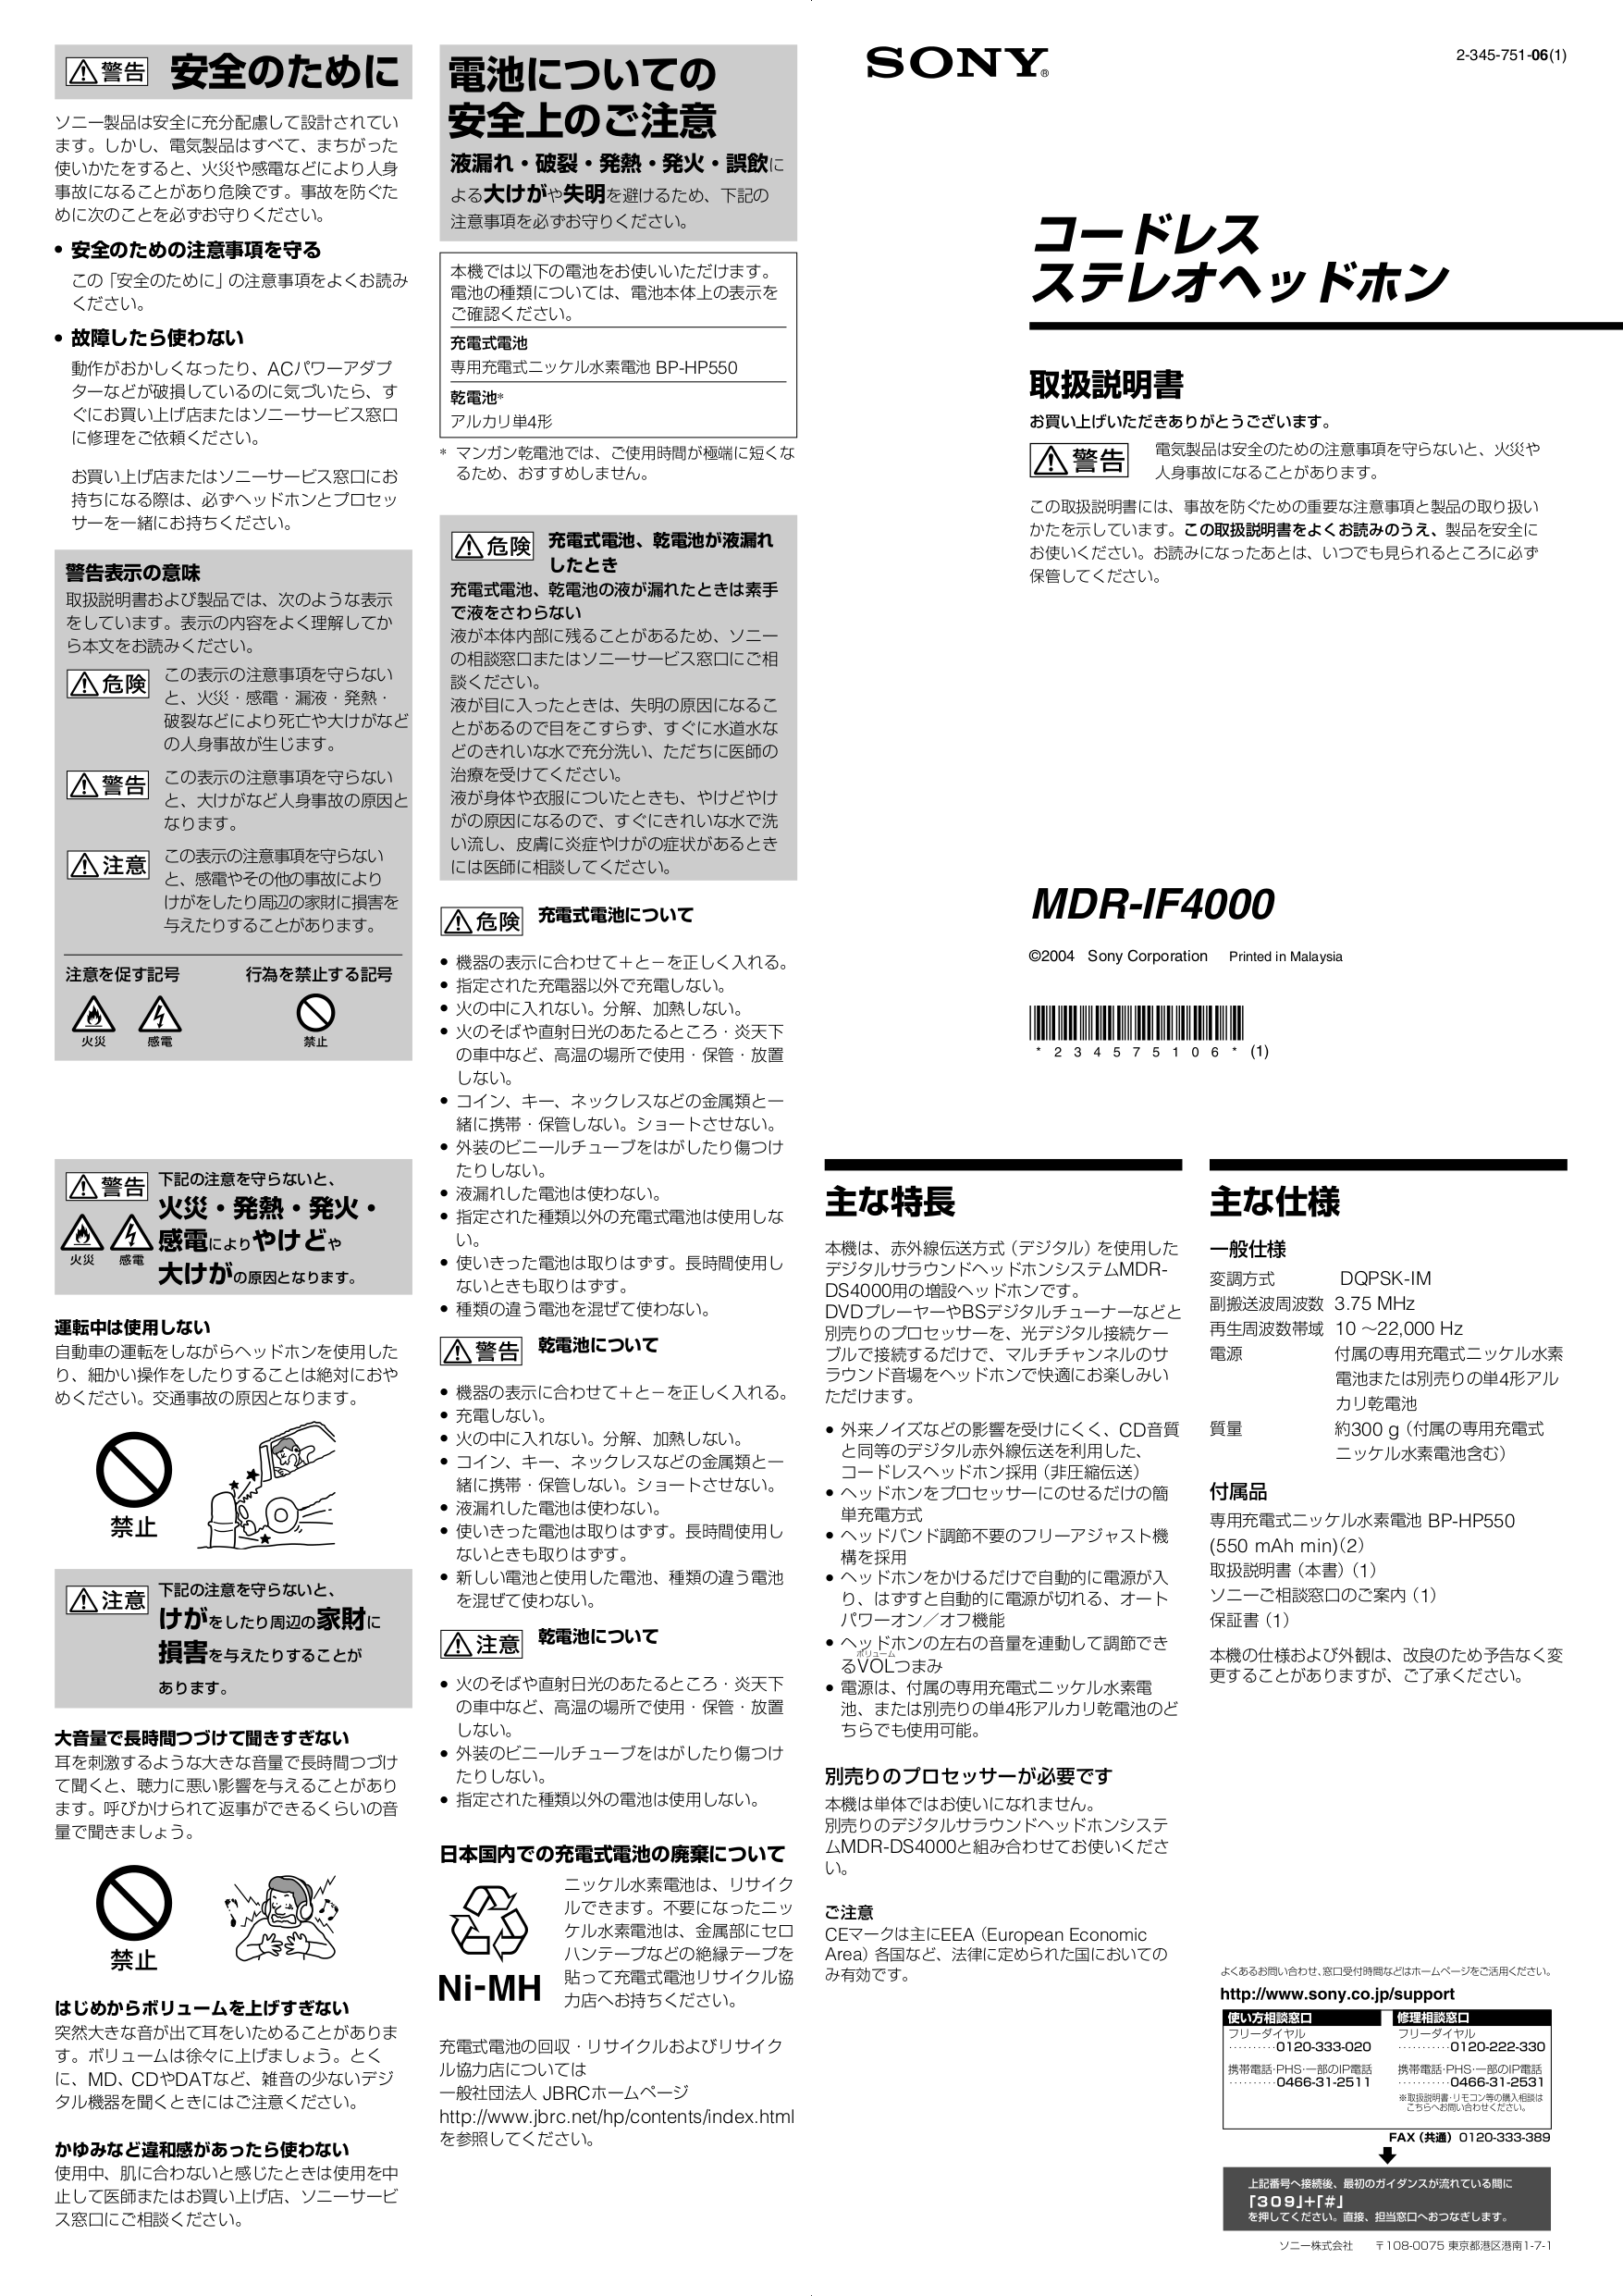 Download free pdf for Sony MDR-IF4000 Headphone manual